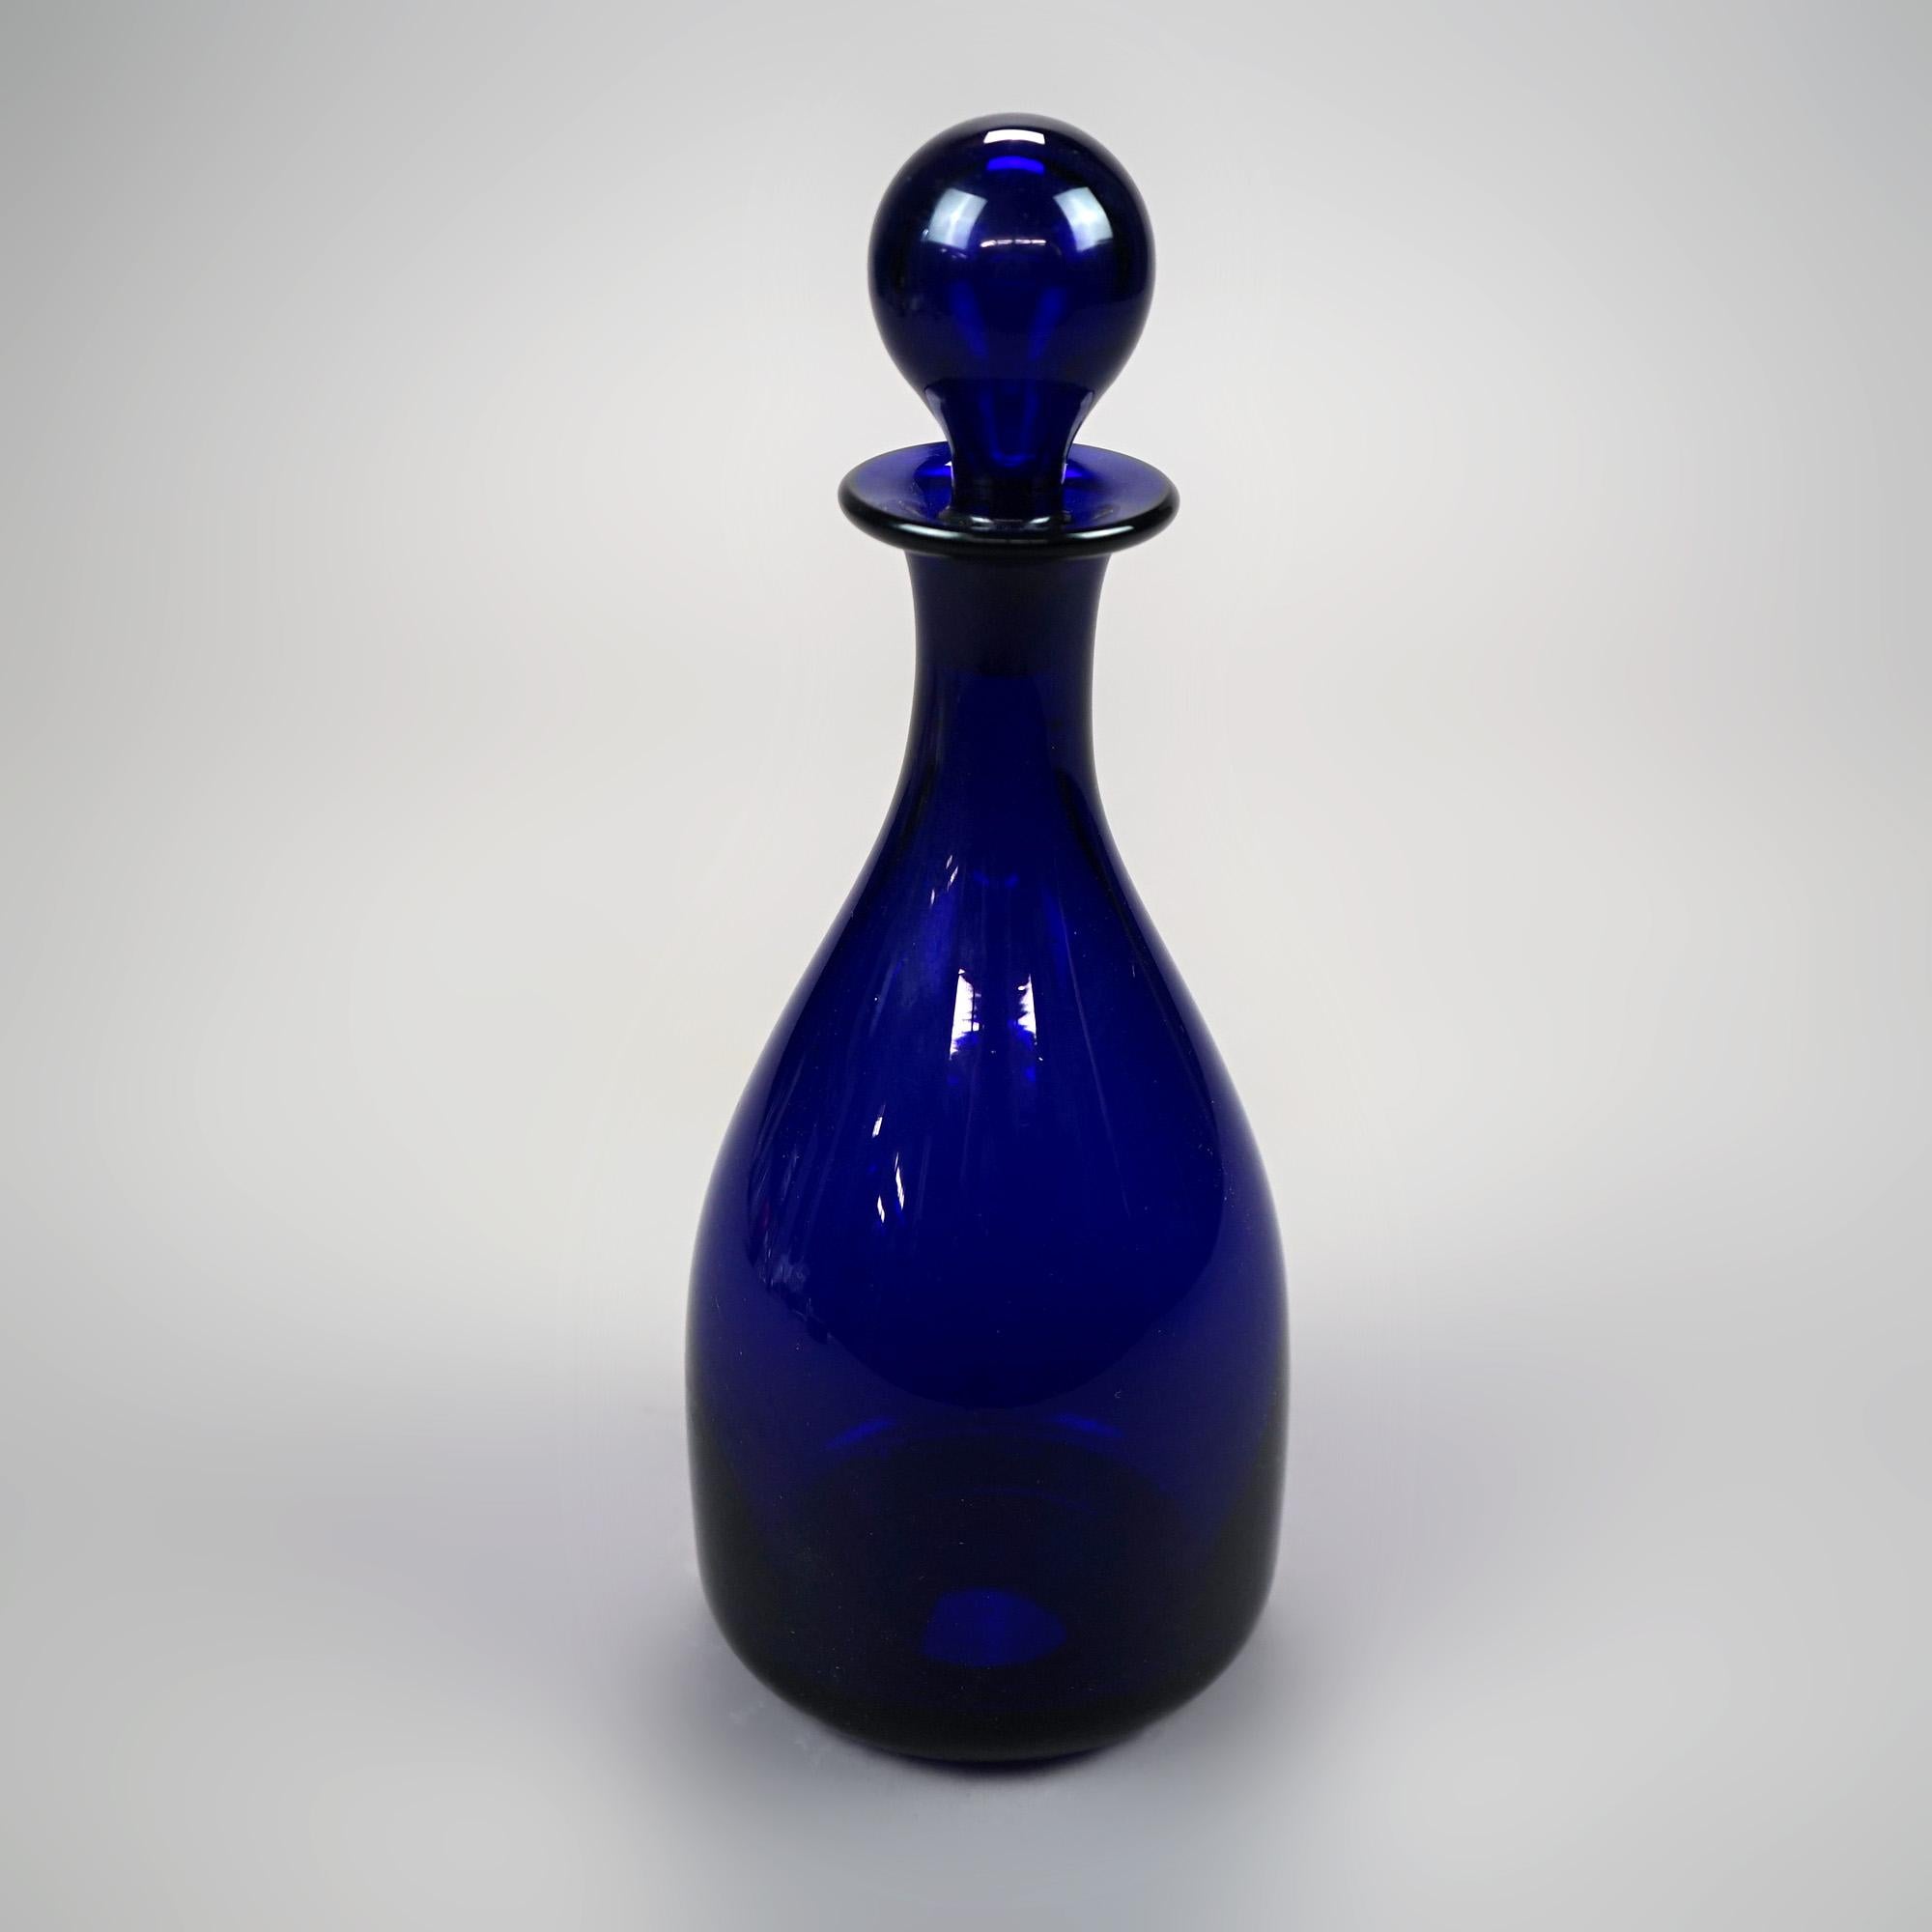 An antique liquor decanter by Thomas Webb offers cobalt blue art glass vessel with stopper, maker signed, c1920

Measures - 10.5''H x 4''W x 4''D.

Catalogue Note: Ask about DISCOUNTED DELIVERY RATES available to most regions within 1,500 miles of